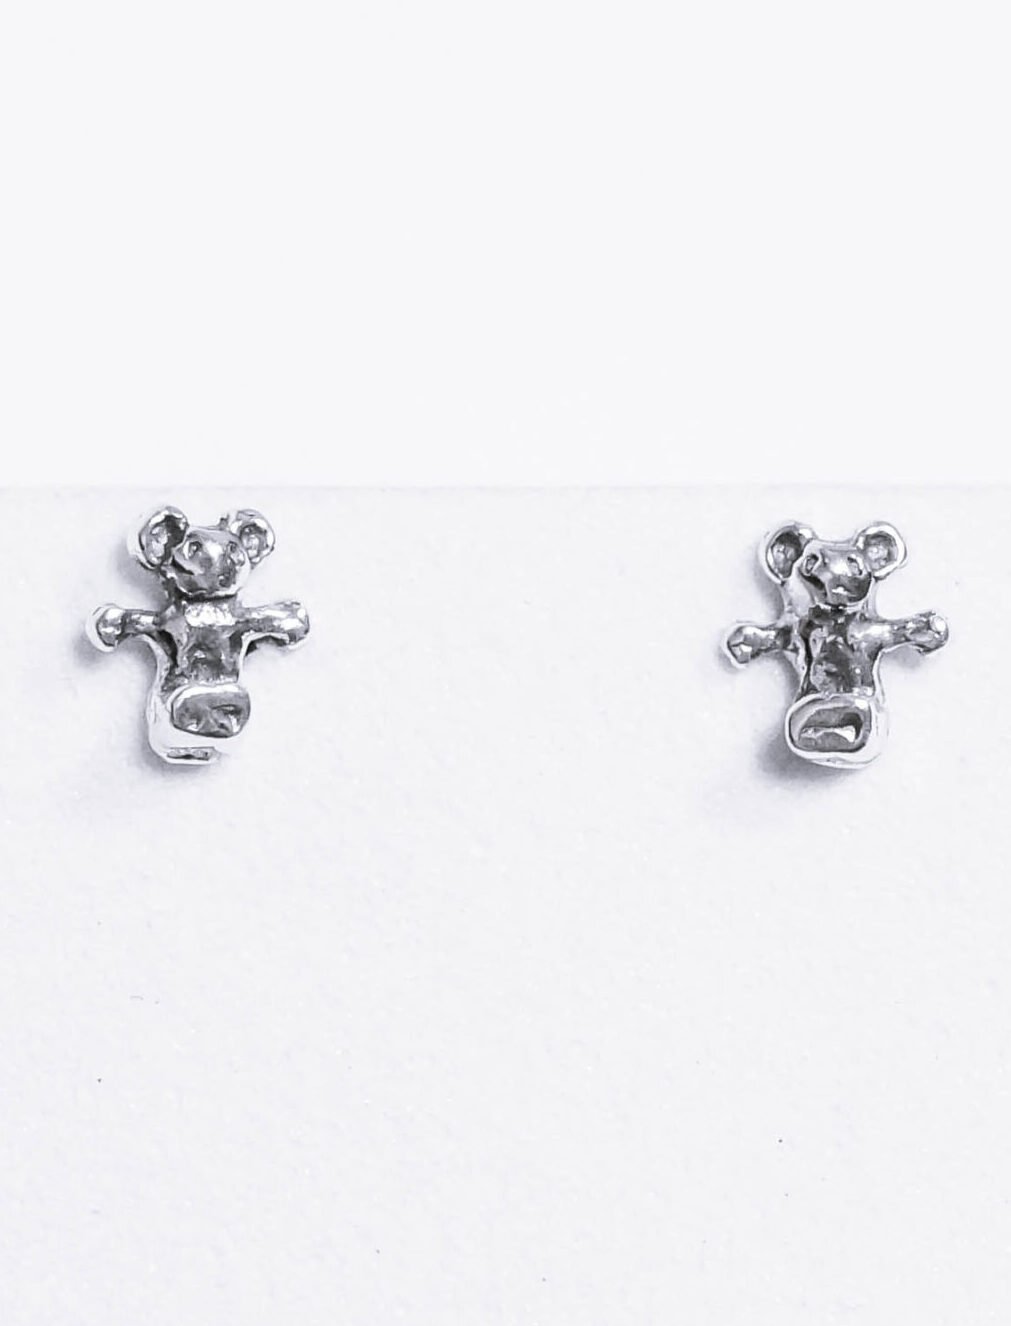 Silver tiny mice earrings - GG UNIQUE